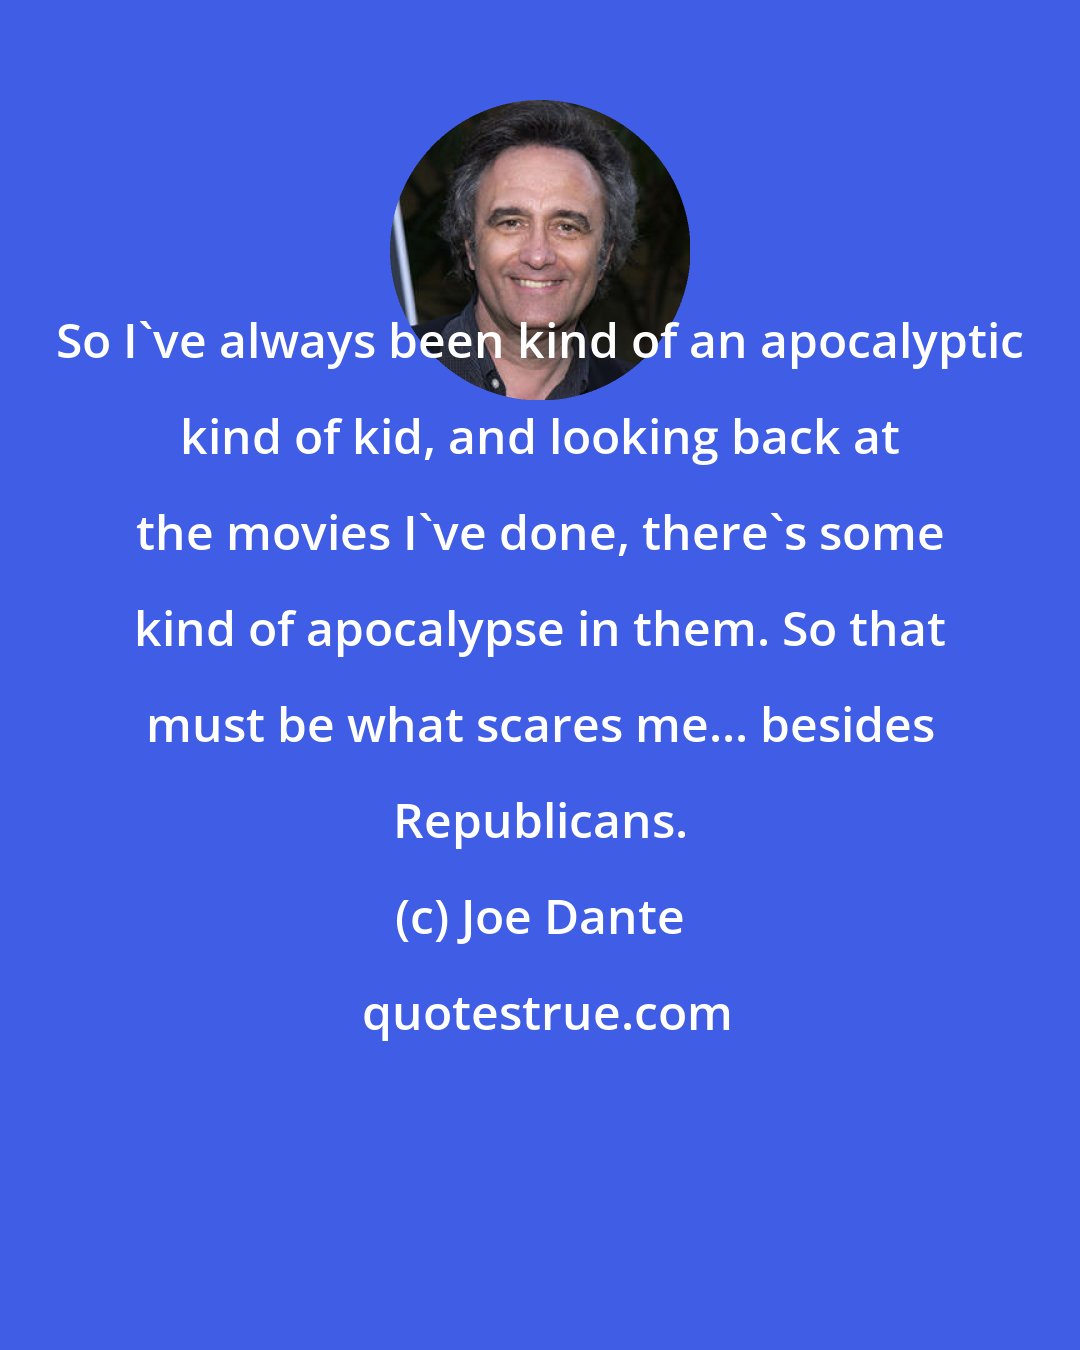 Joe Dante: So I've always been kind of an apocalyptic kind of kid, and looking back at the movies I've done, there's some kind of apocalypse in them. So that must be what scares me... besides Republicans.